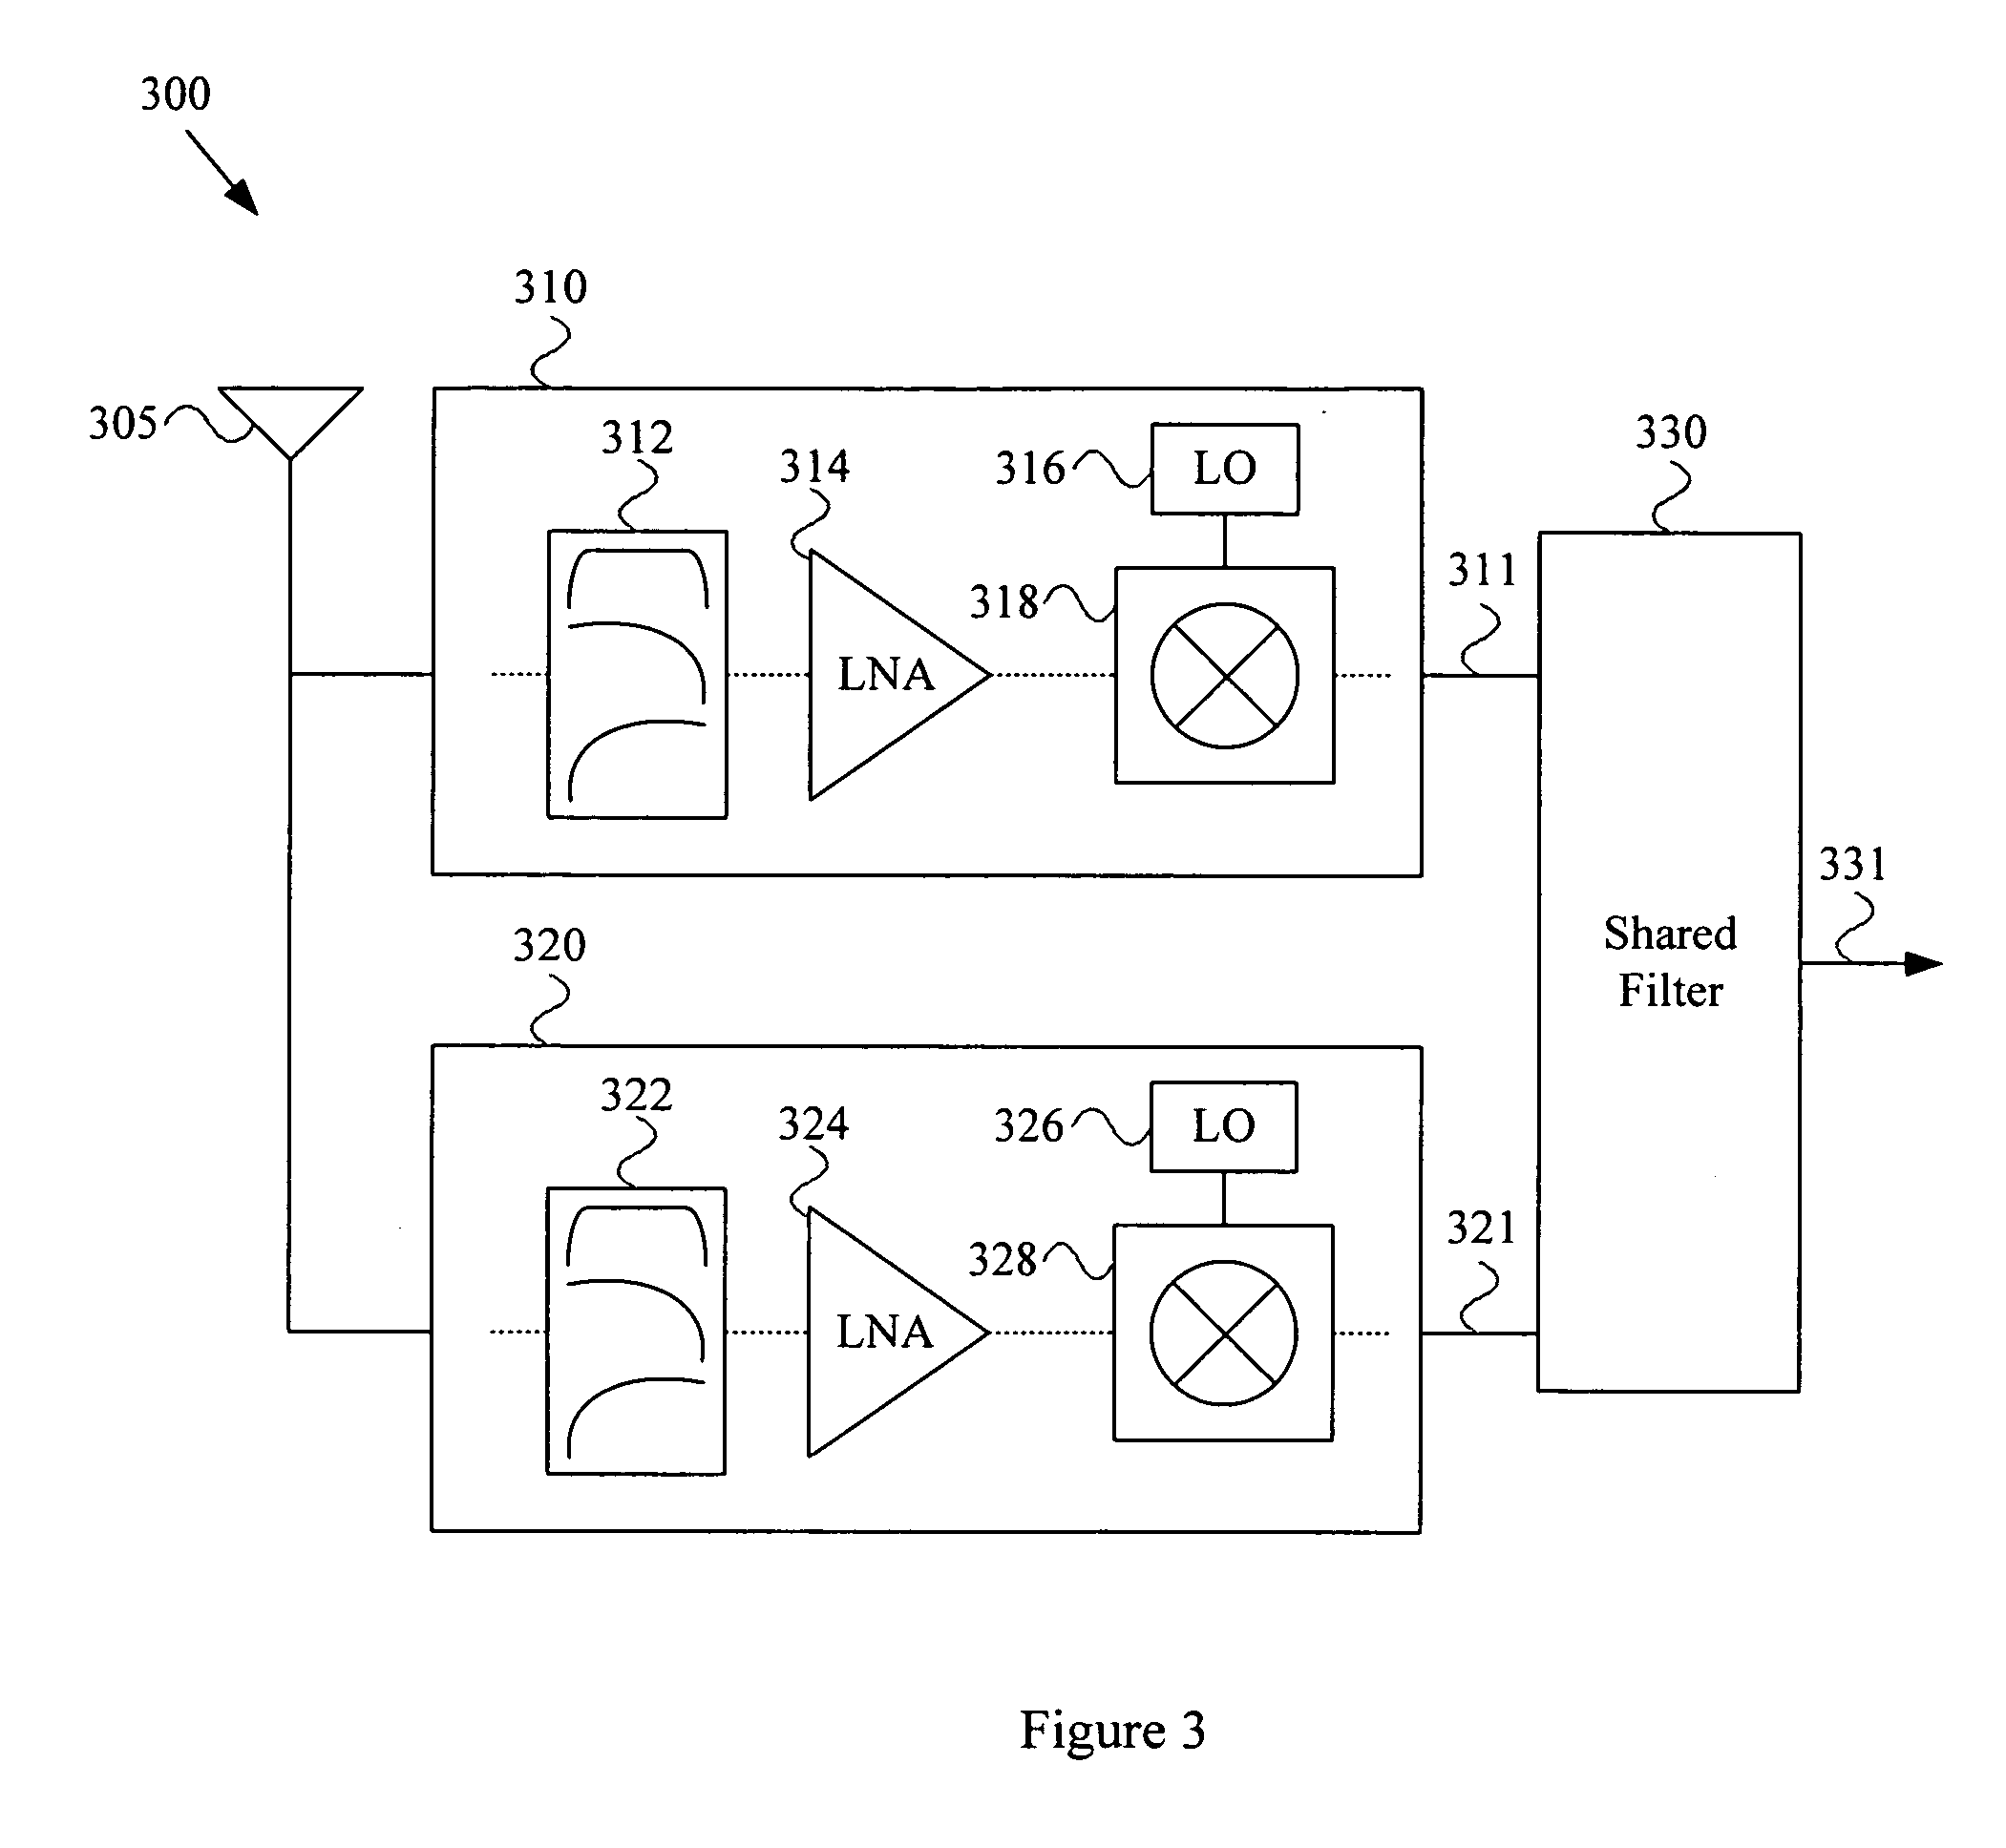 Multimode communication device with shared signal path programmable filter